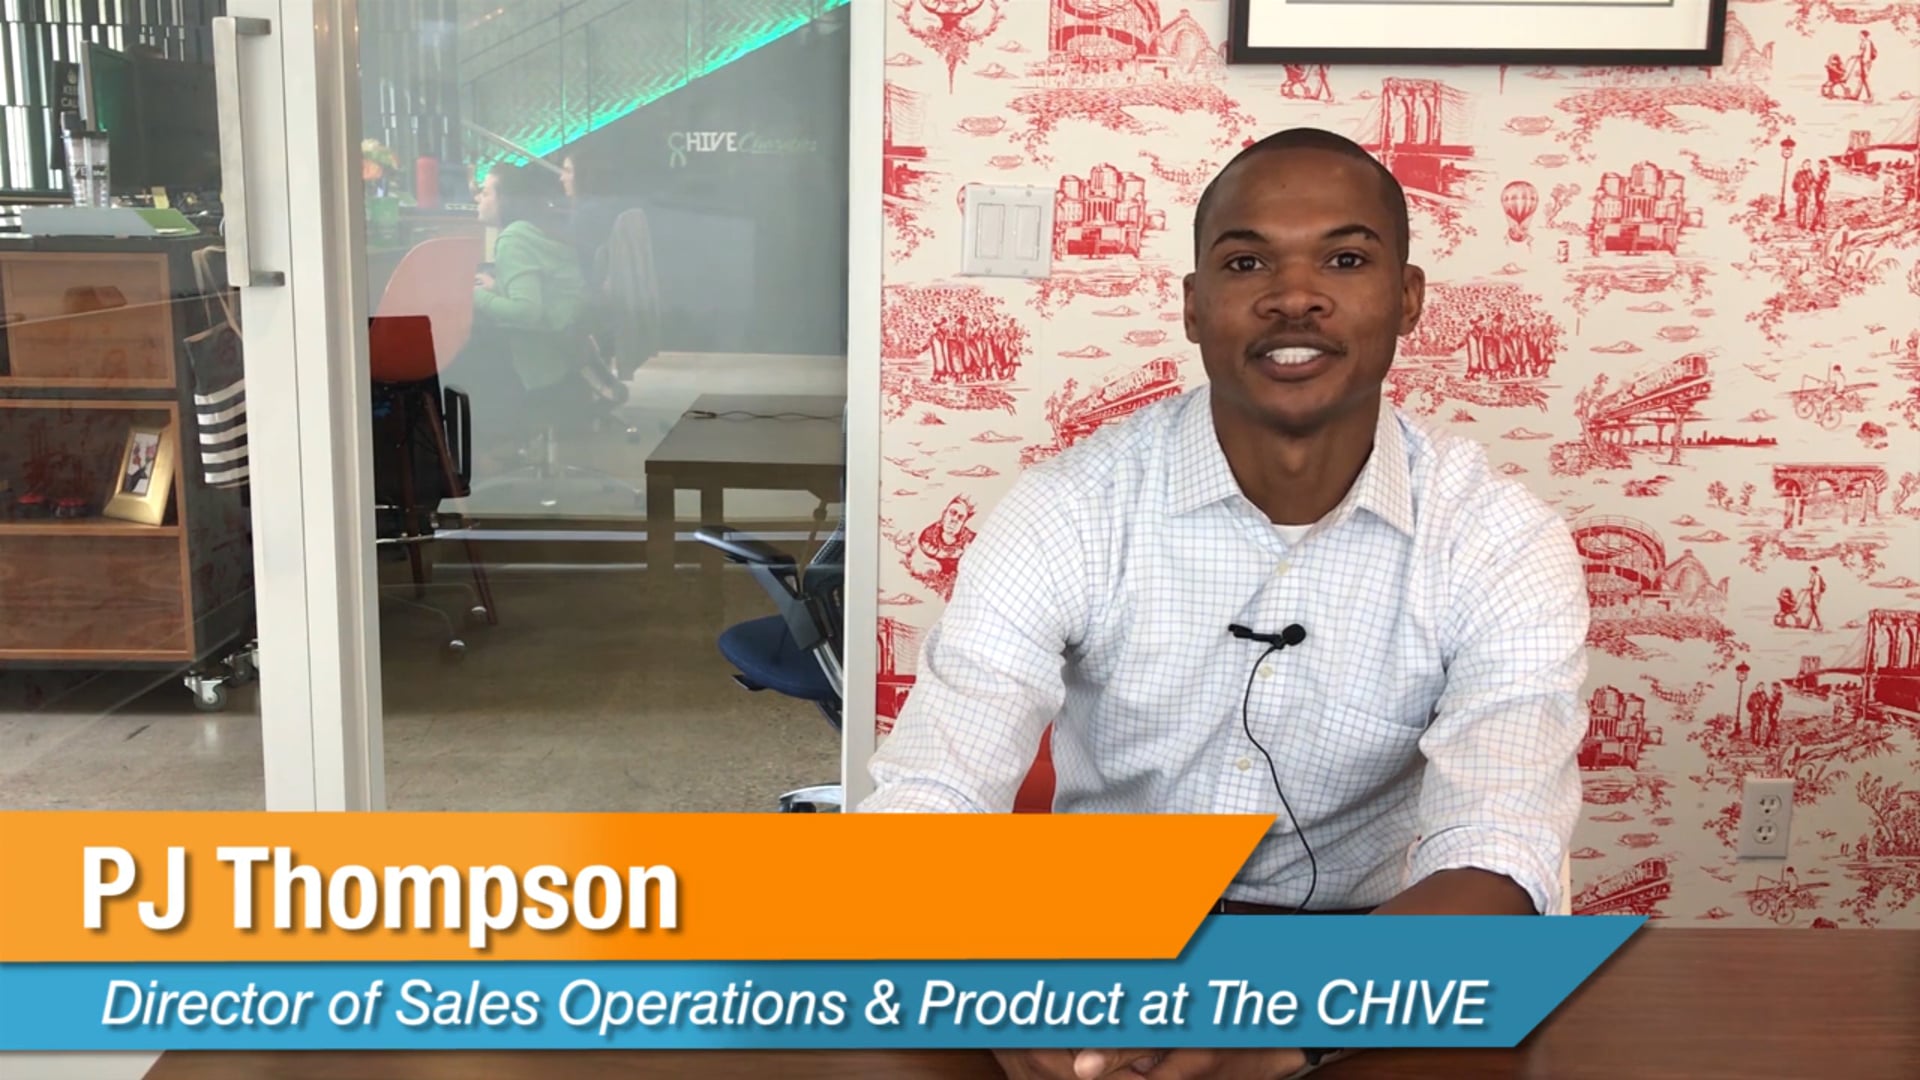 PJ Thompson - Director of Sales Operations & Product